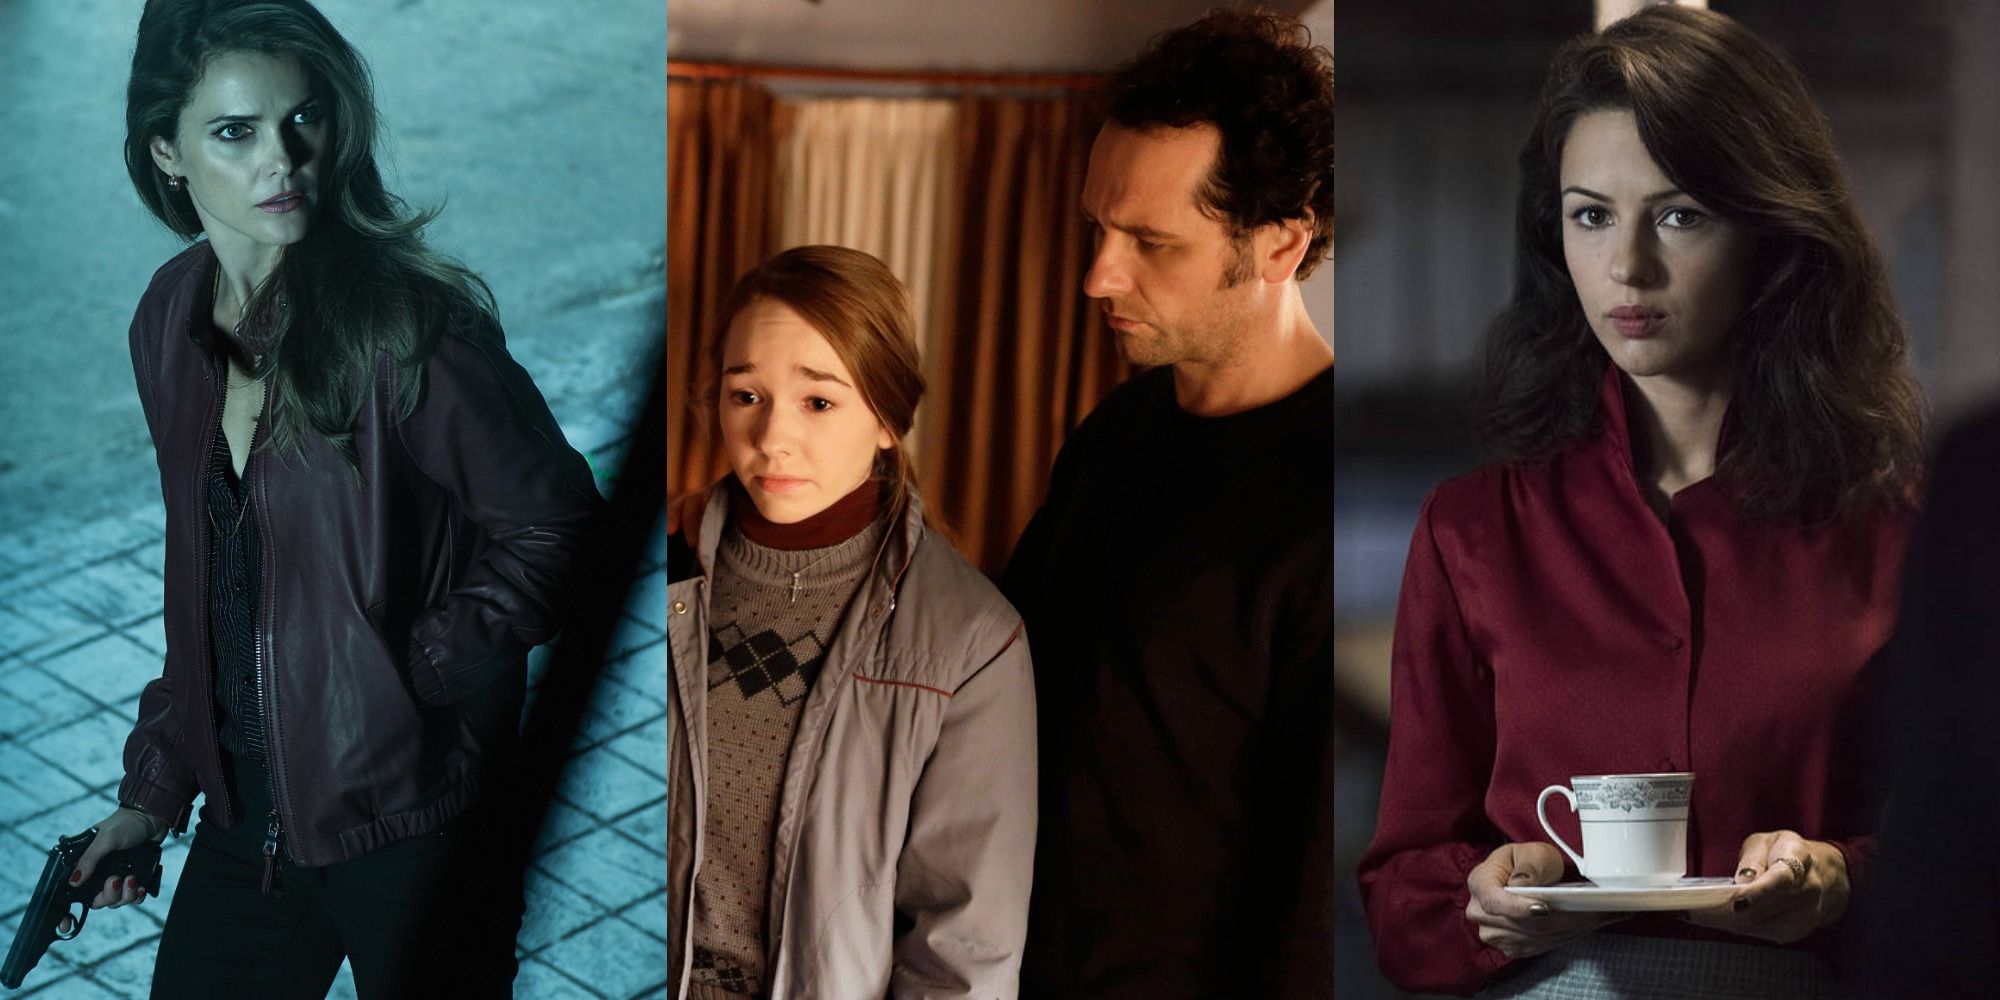 Split image of Elizabeth with a gun, Philip consoling Paige, and Nina from The Americans